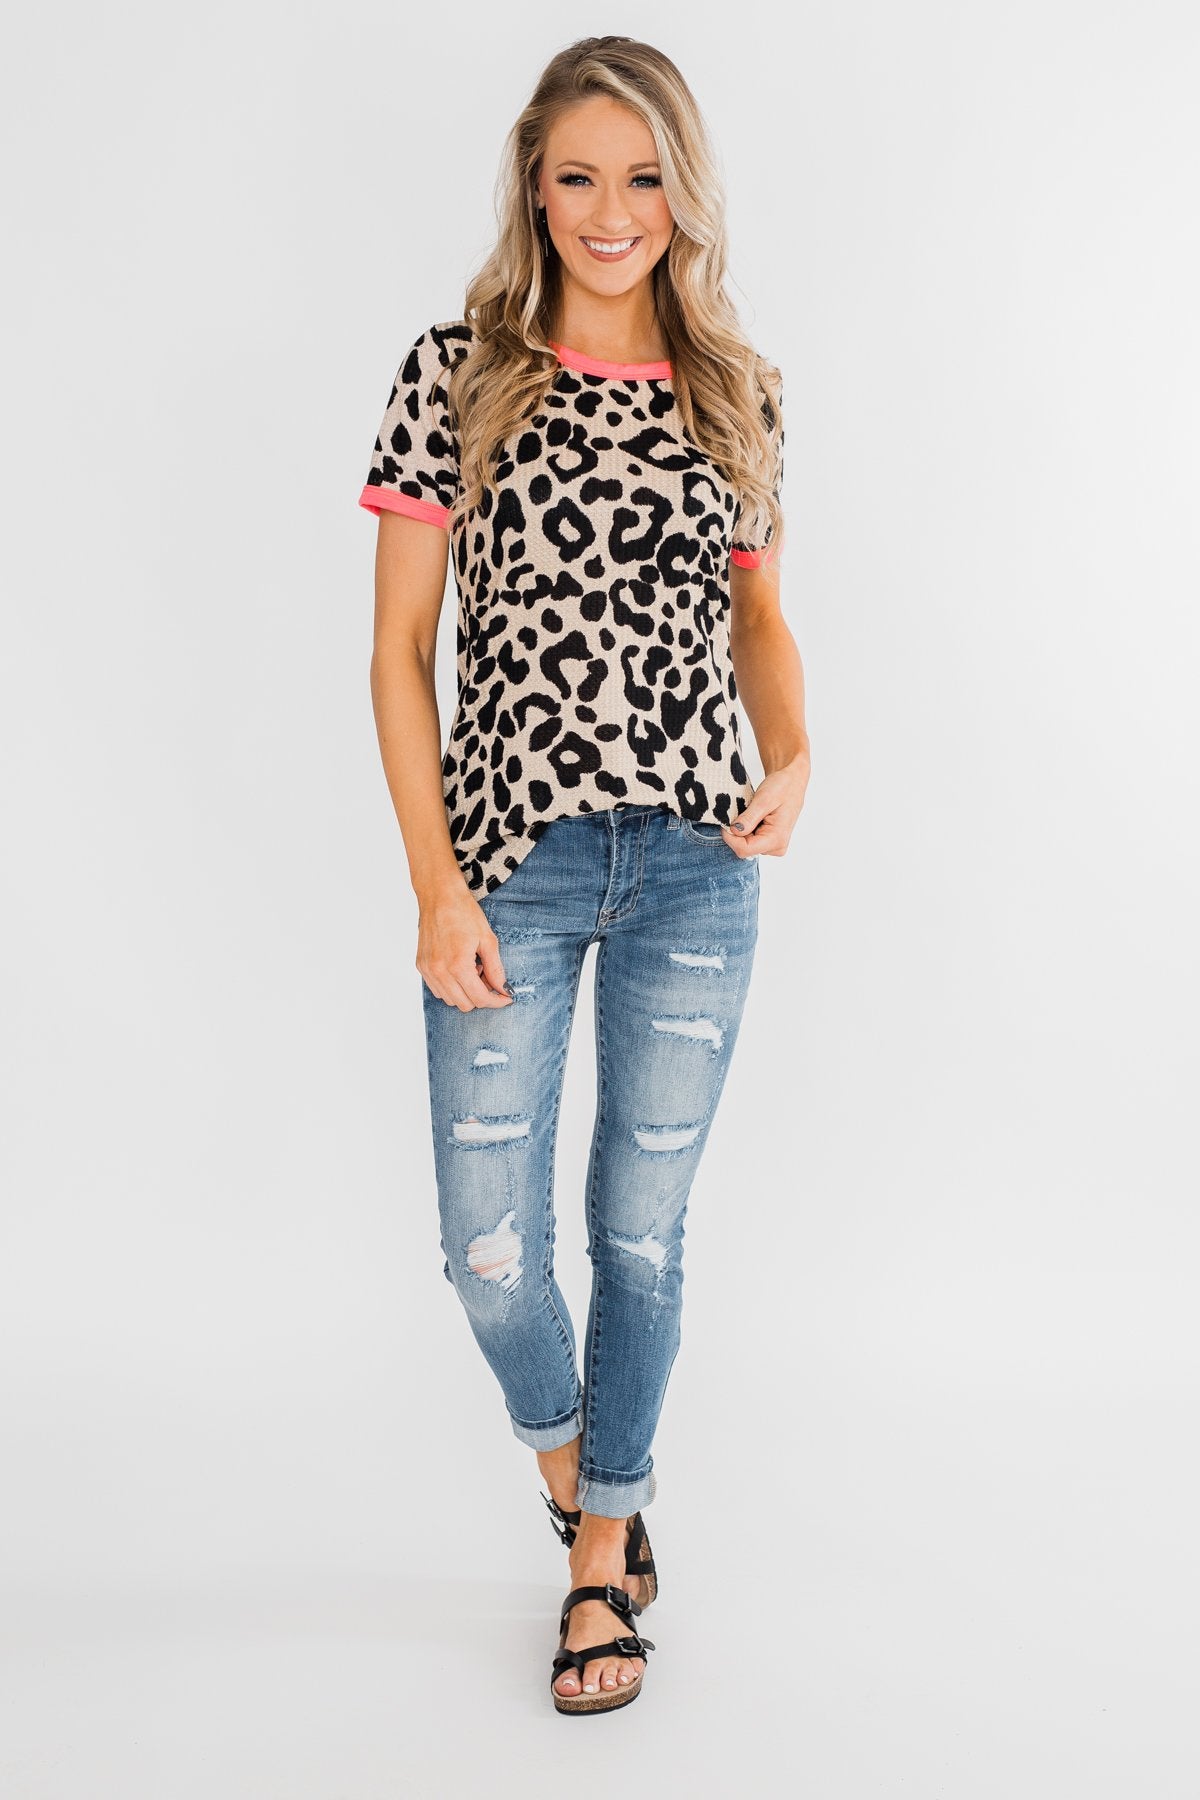 Love for Leopard Short Sleeve Top- Neutral & Neon Pink